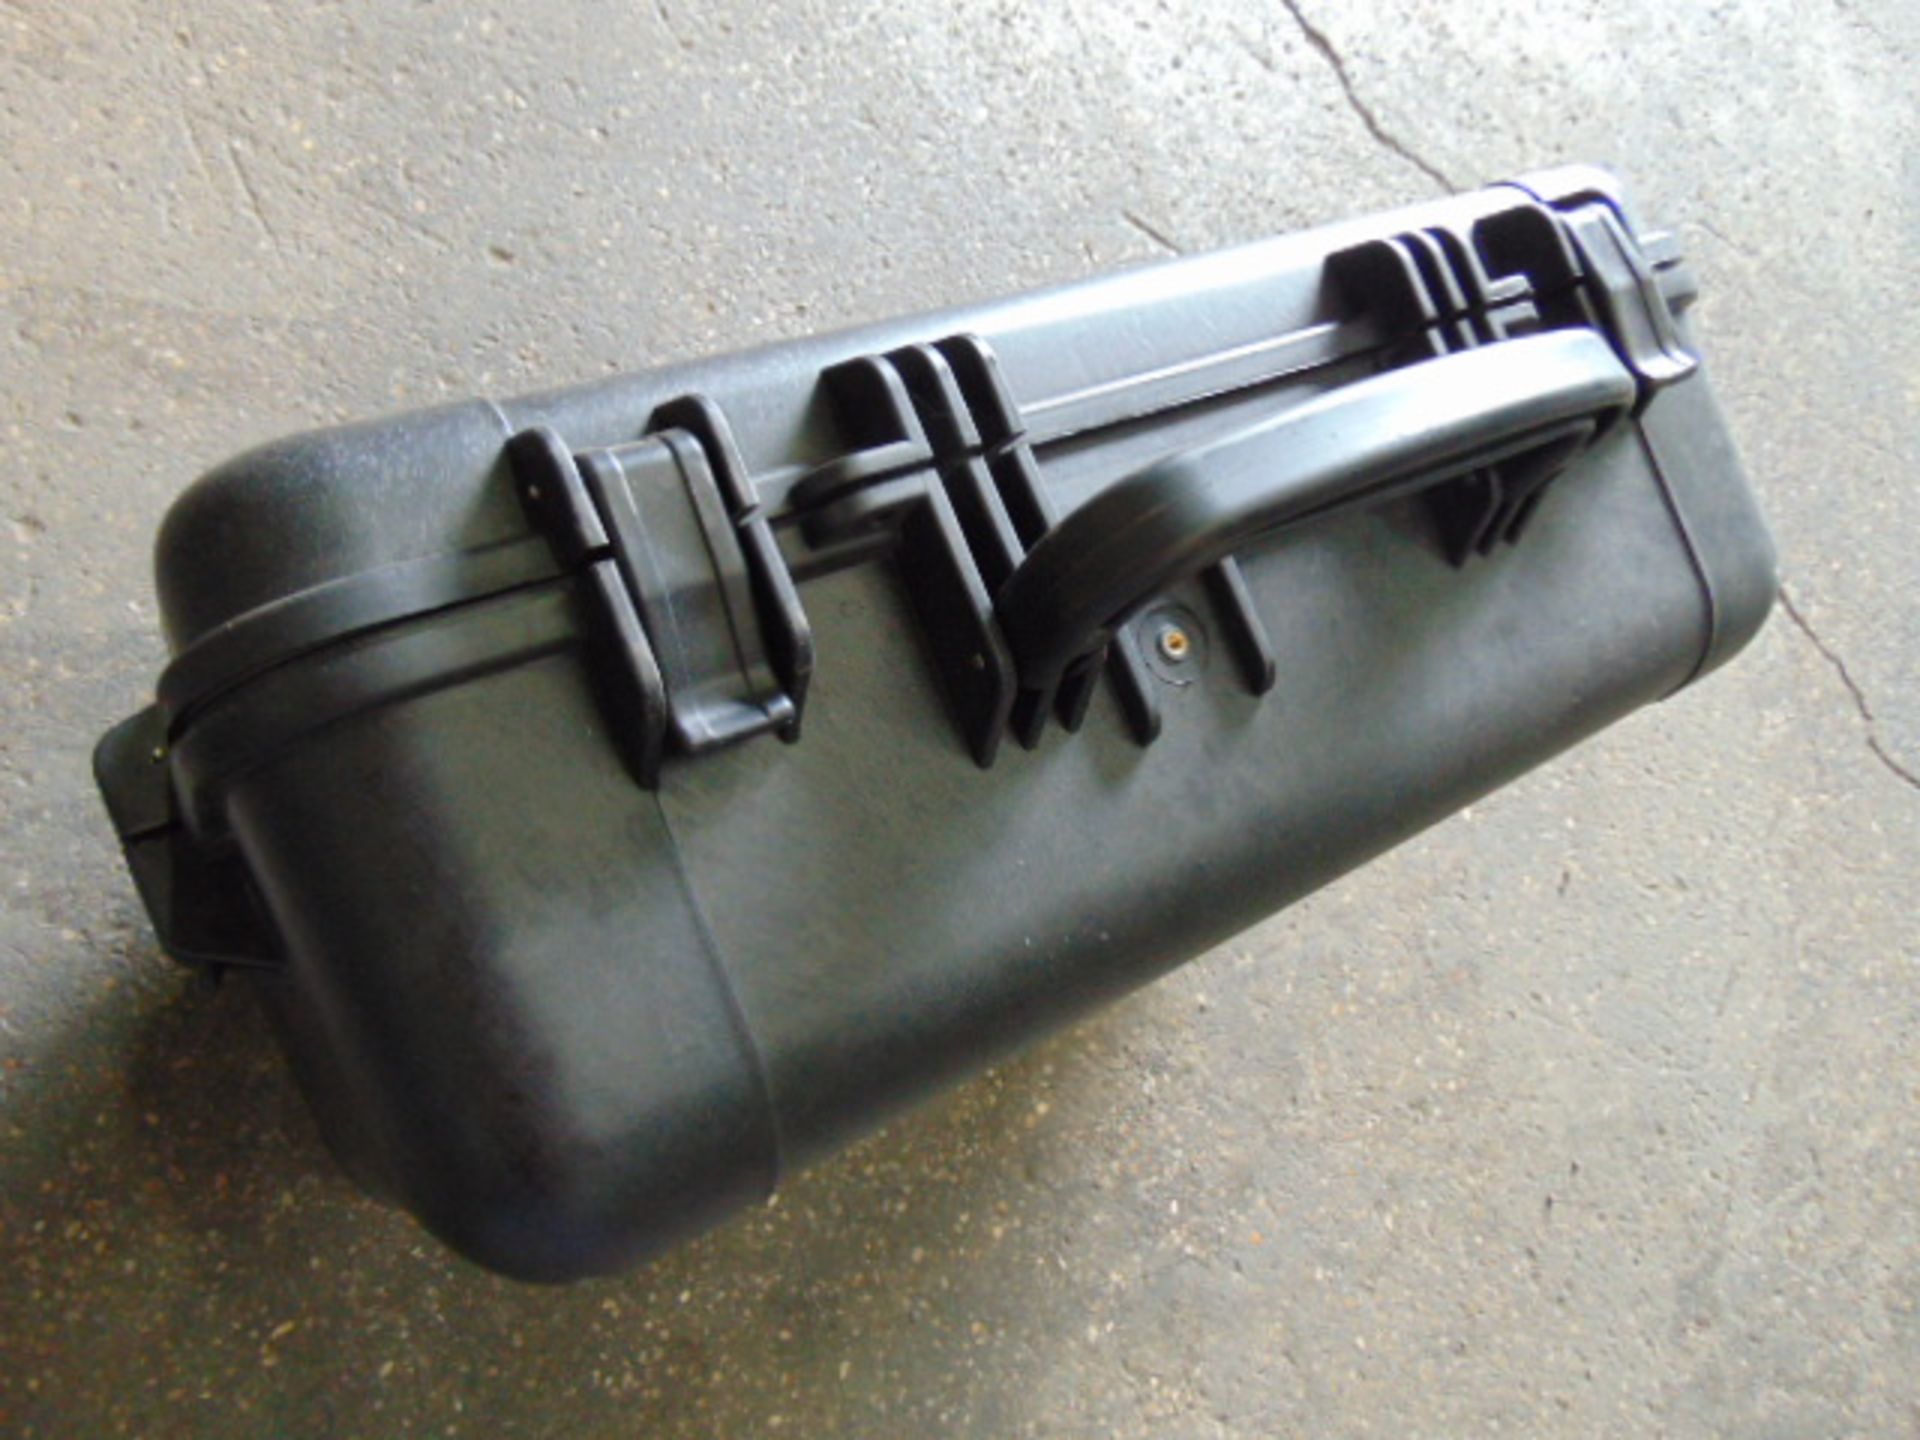 2 x Heavy-duty Waterproof Peli Style Hard Cases with Removeable Foam Inserts - Image 2 of 5